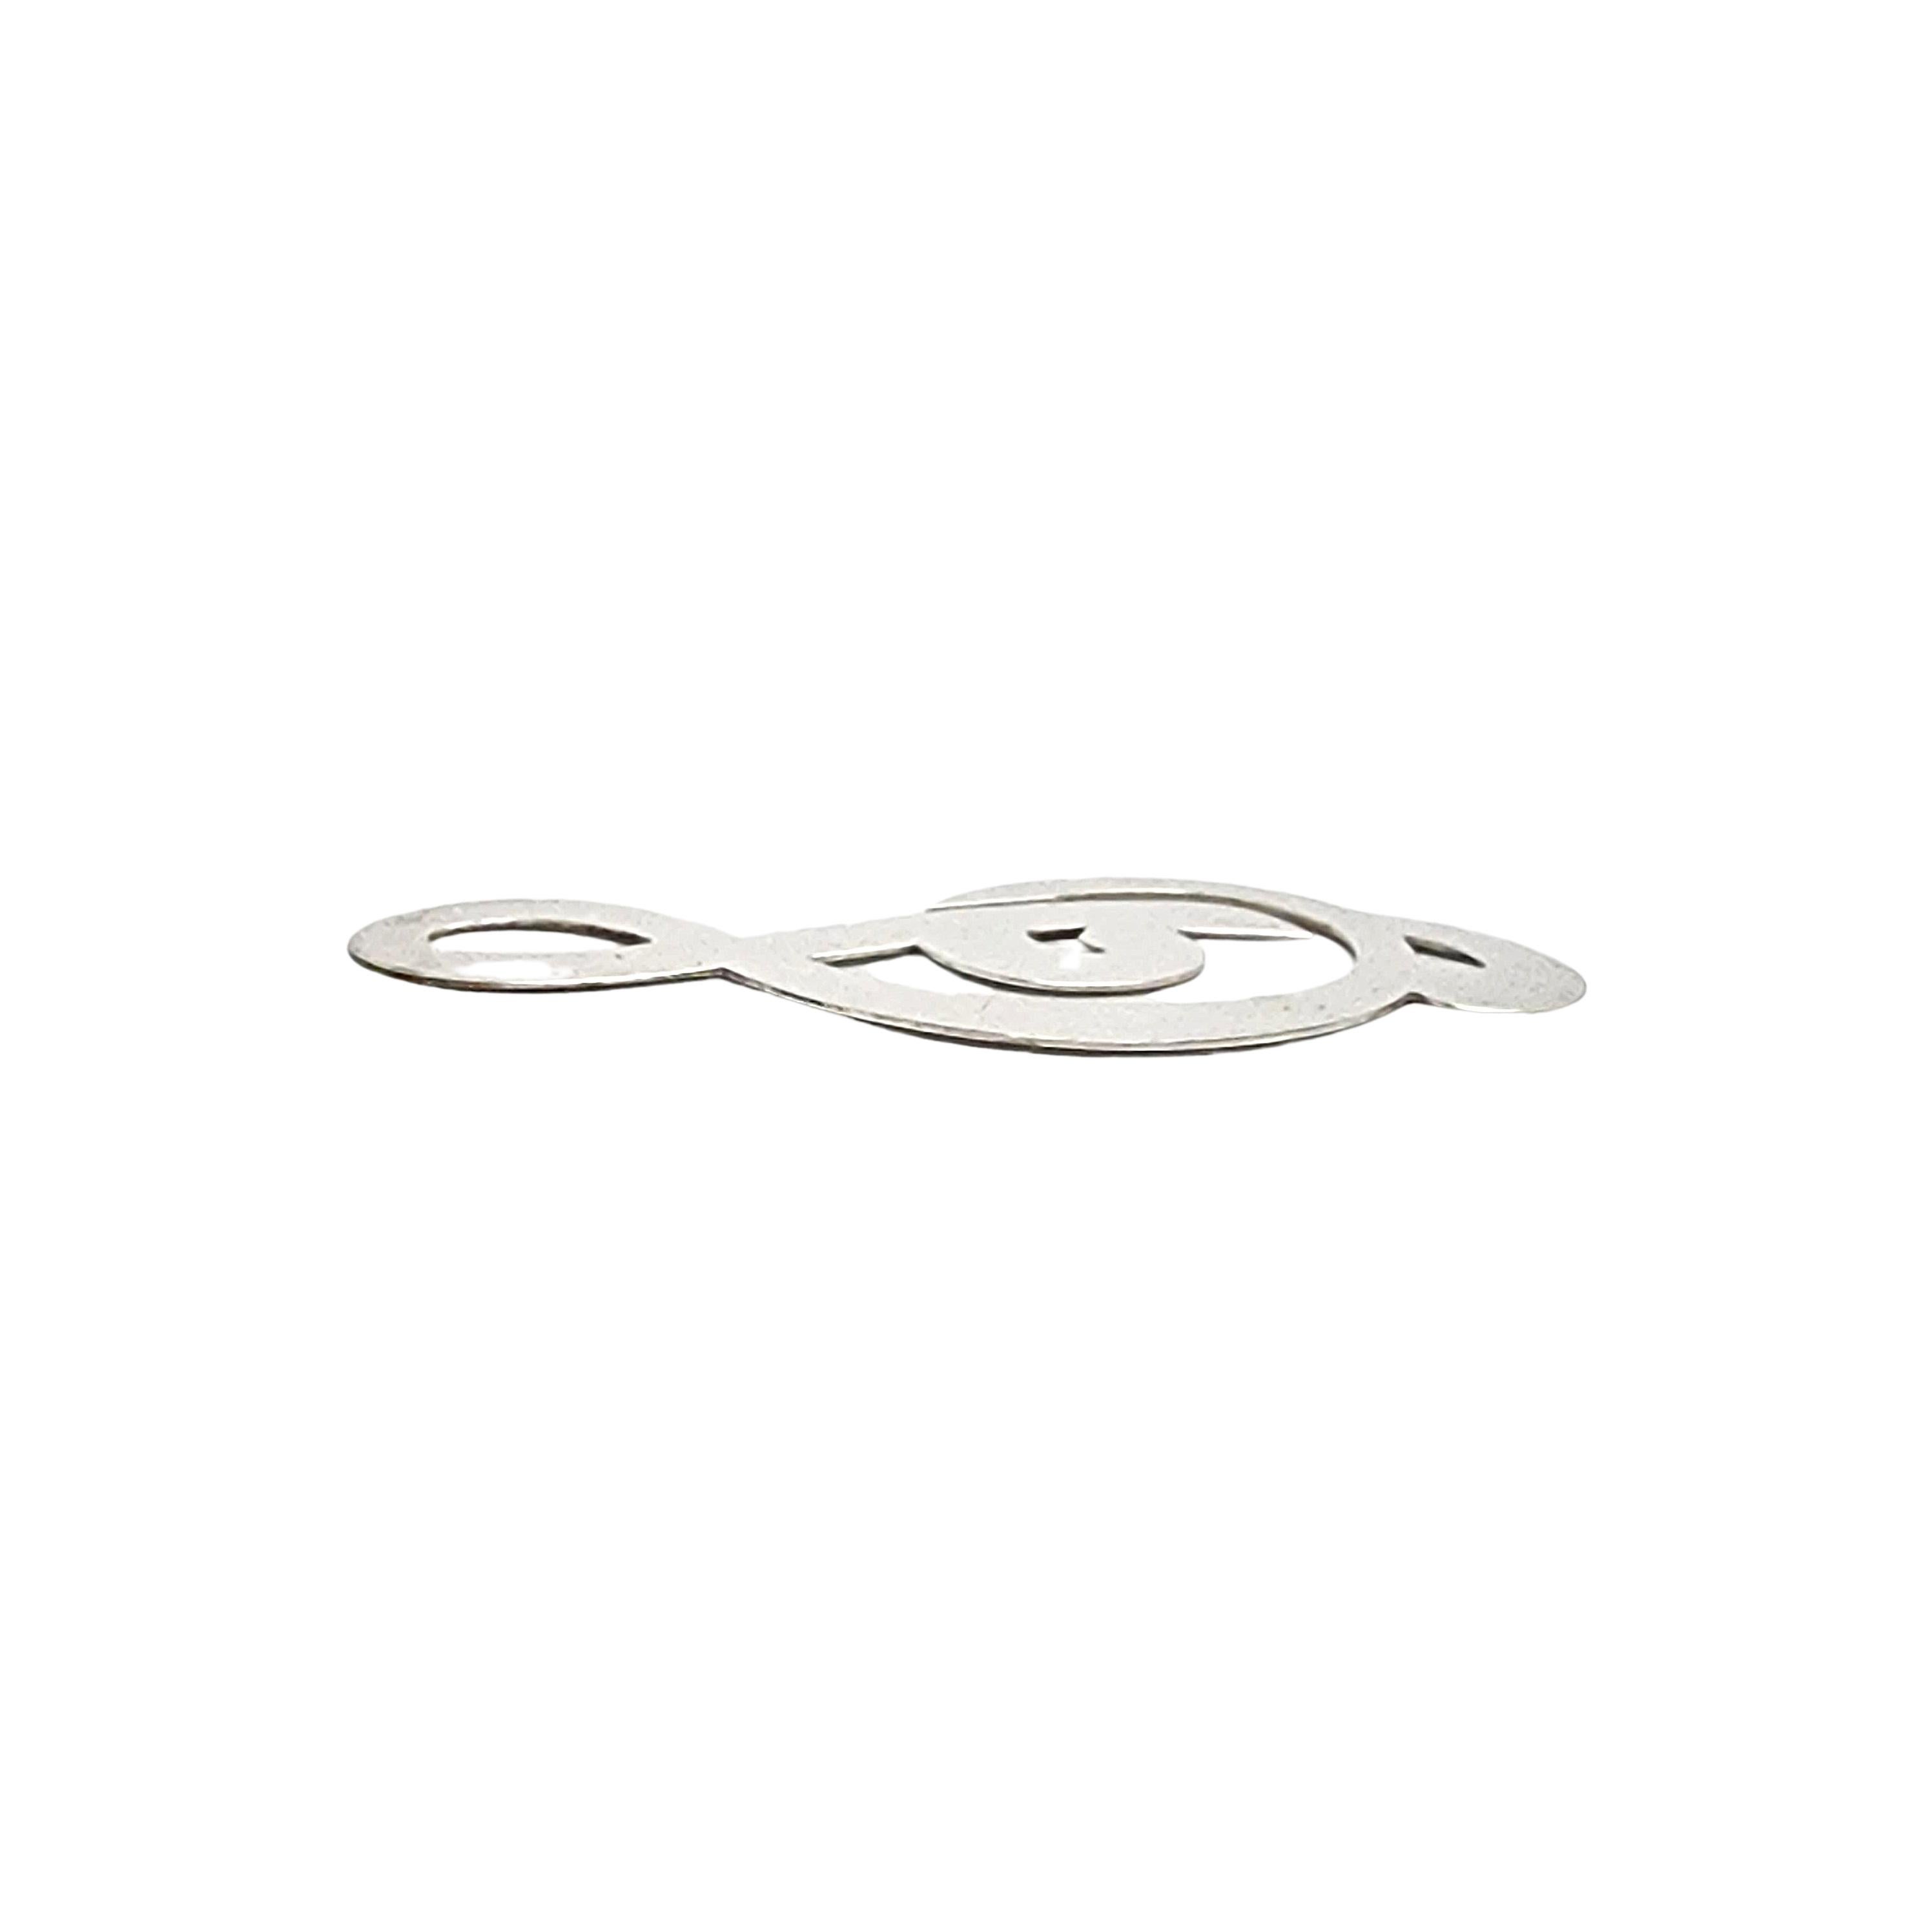 Tiffany & Co Sterling Silver Treble Clef Bookmark Clip (A) #14630 In Good Condition For Sale In Washington Depot, CT